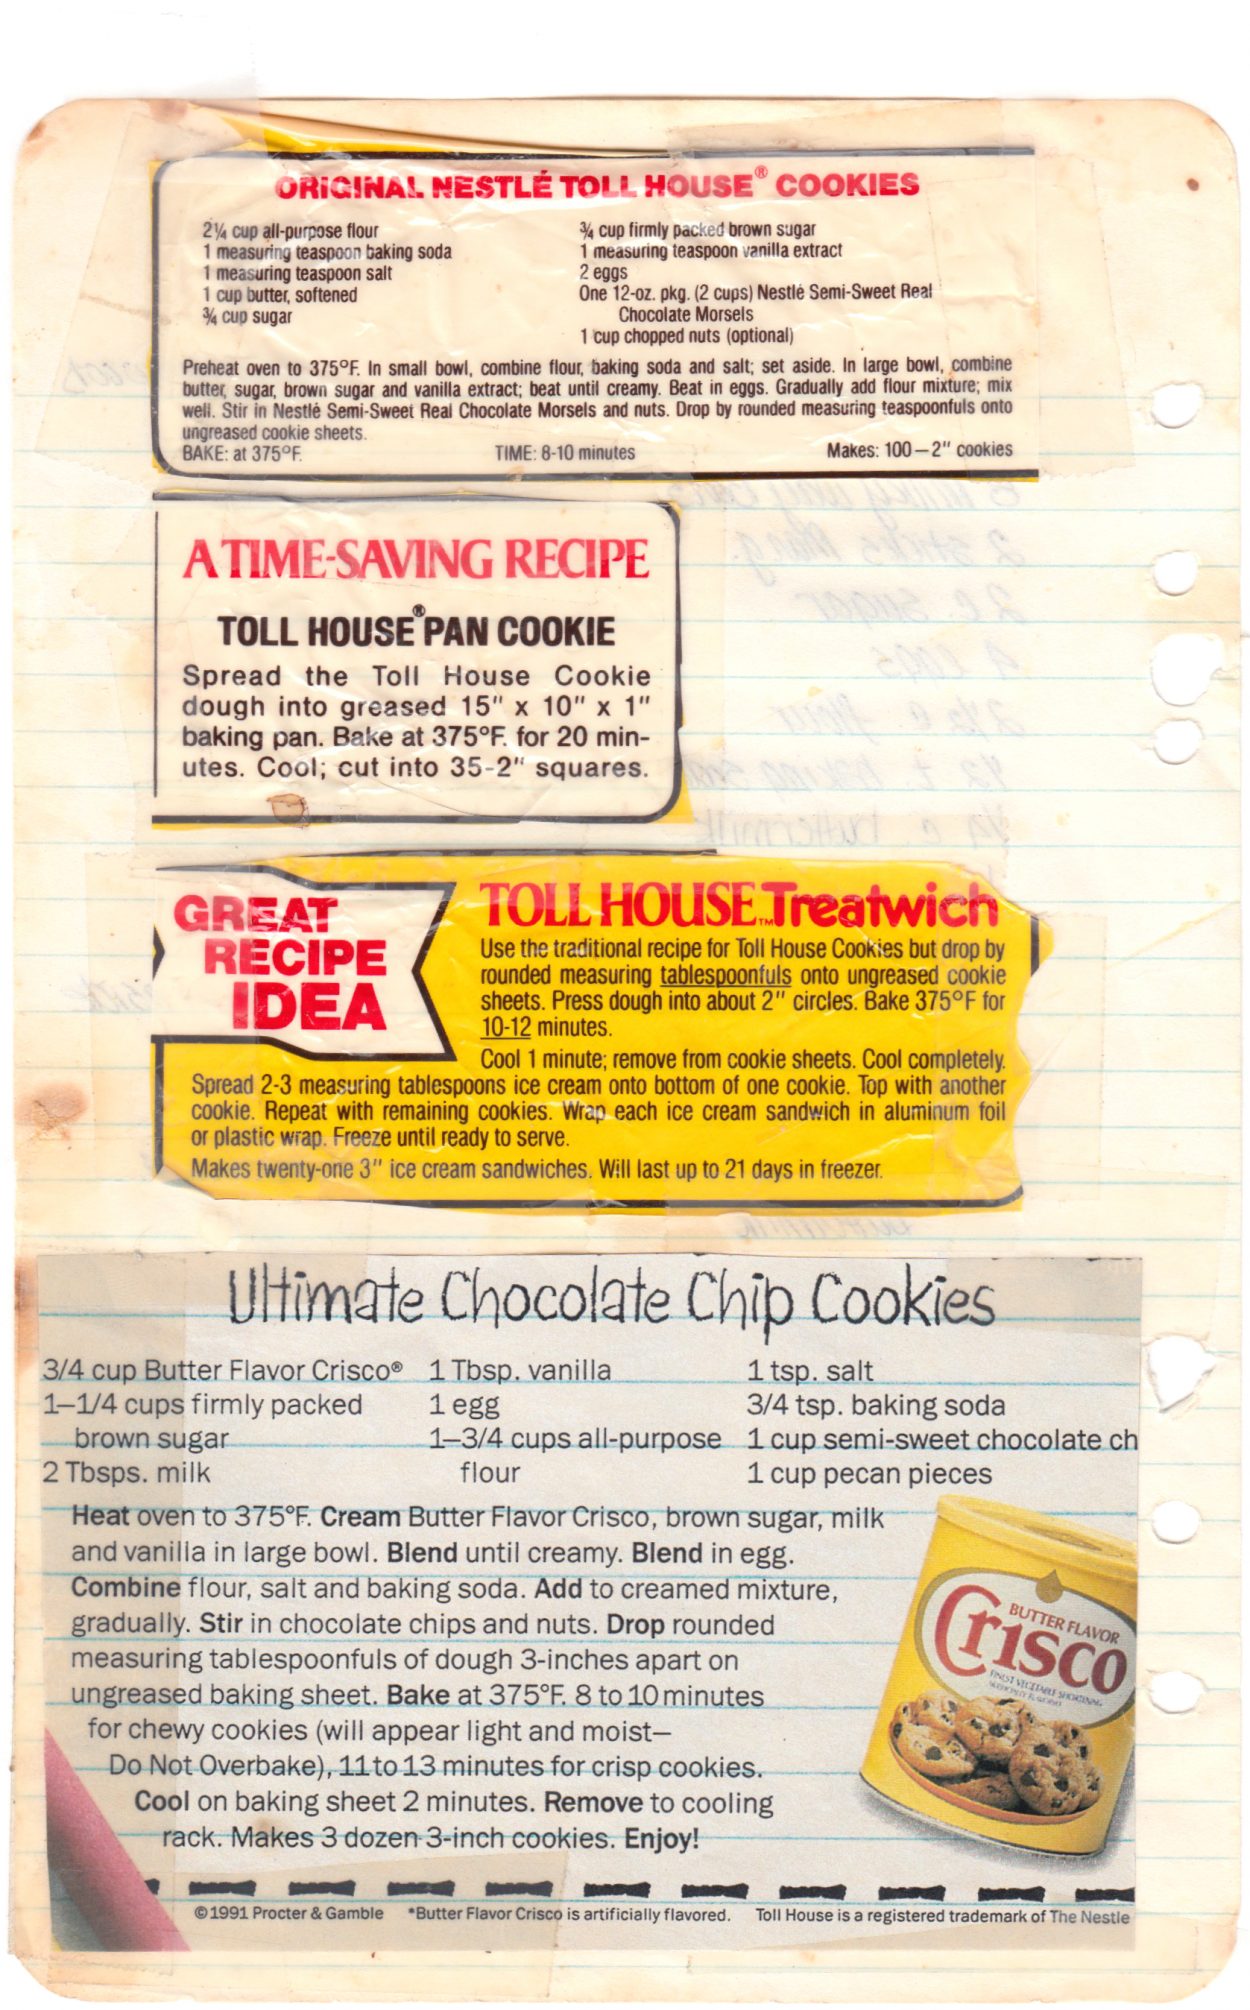 Chocolate chip cookie recipes from my mom’s recipe notebook